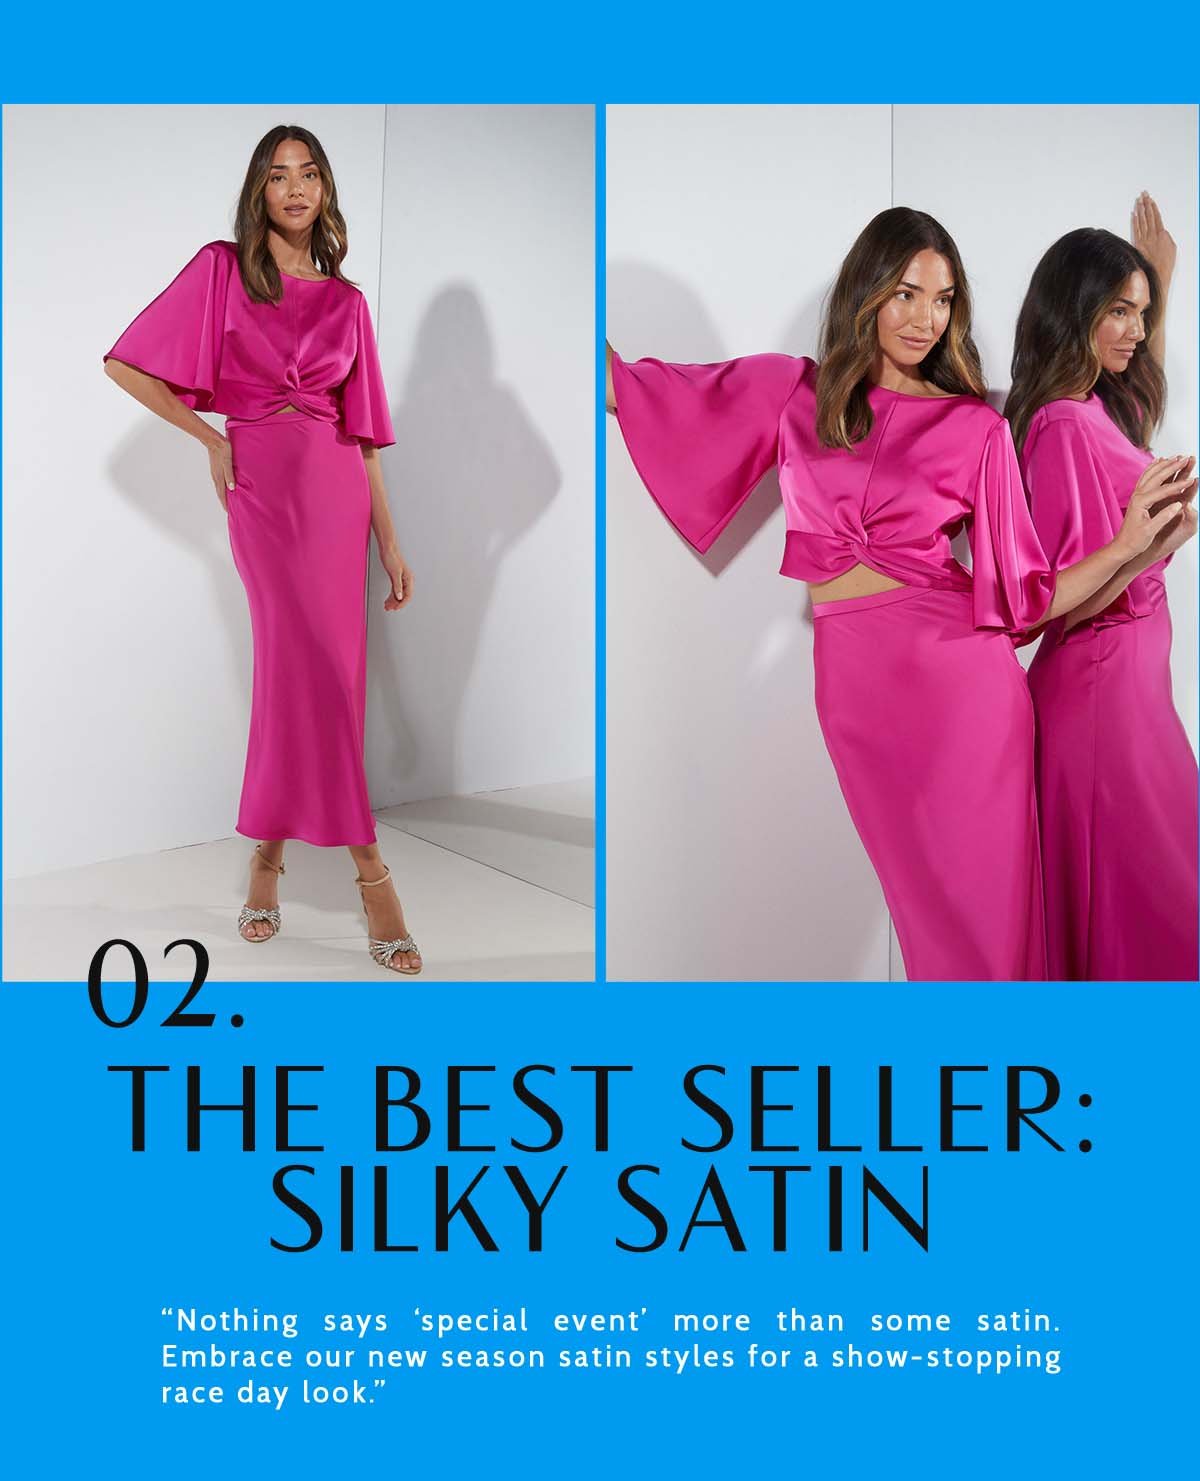 2. The Best Seller: Silky Satin. “Nothing says ‘special event' more than some satin. Embrace our new season satin styles for a show-stopping race day look.”